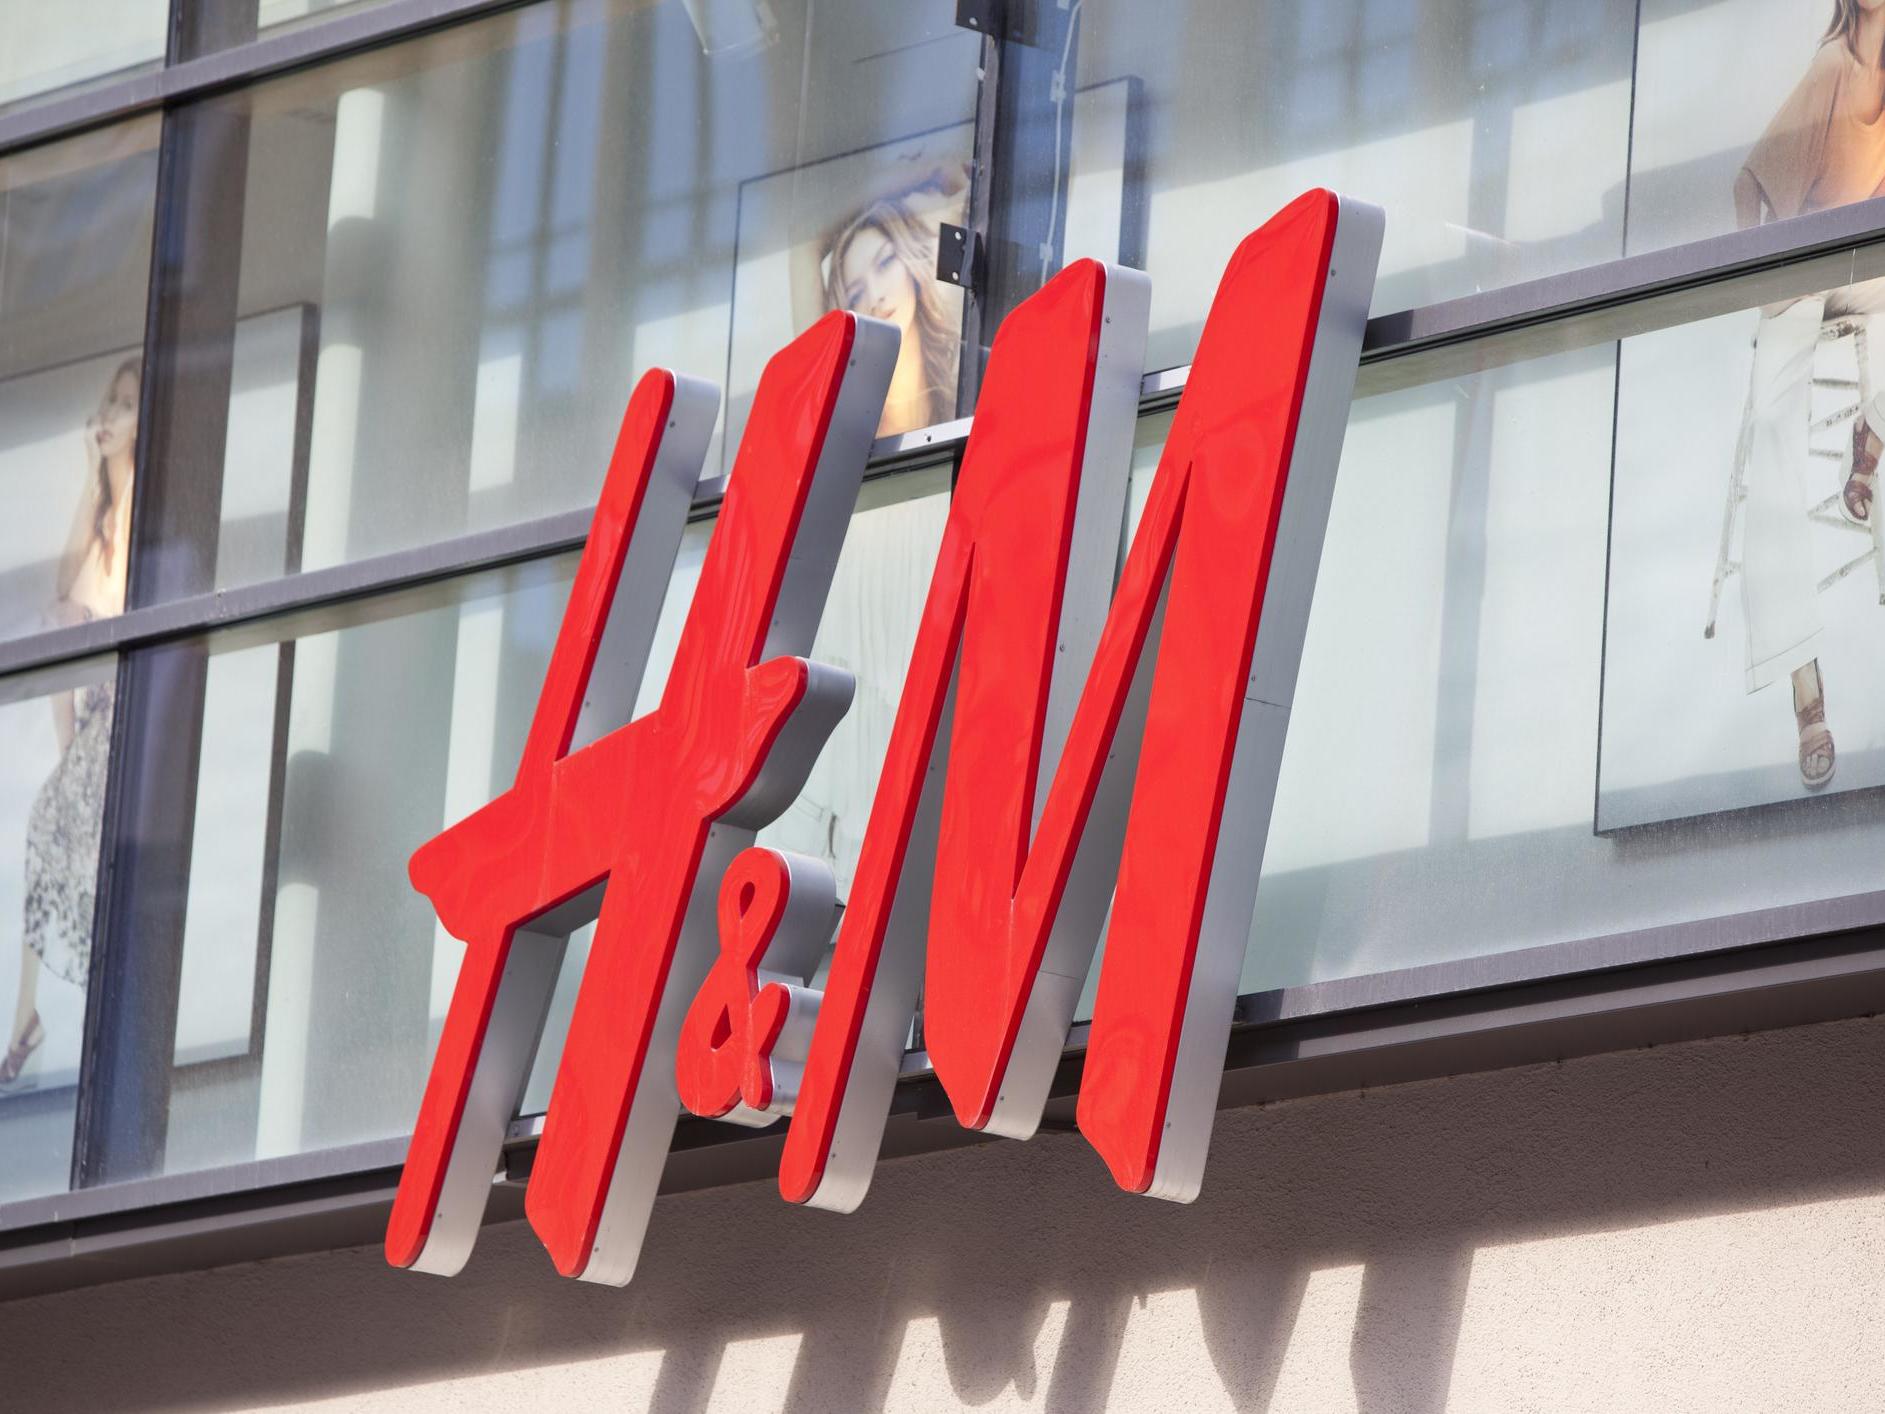 H&M accused of 'greenwashing' over plans to make clothes from sustainable fabric